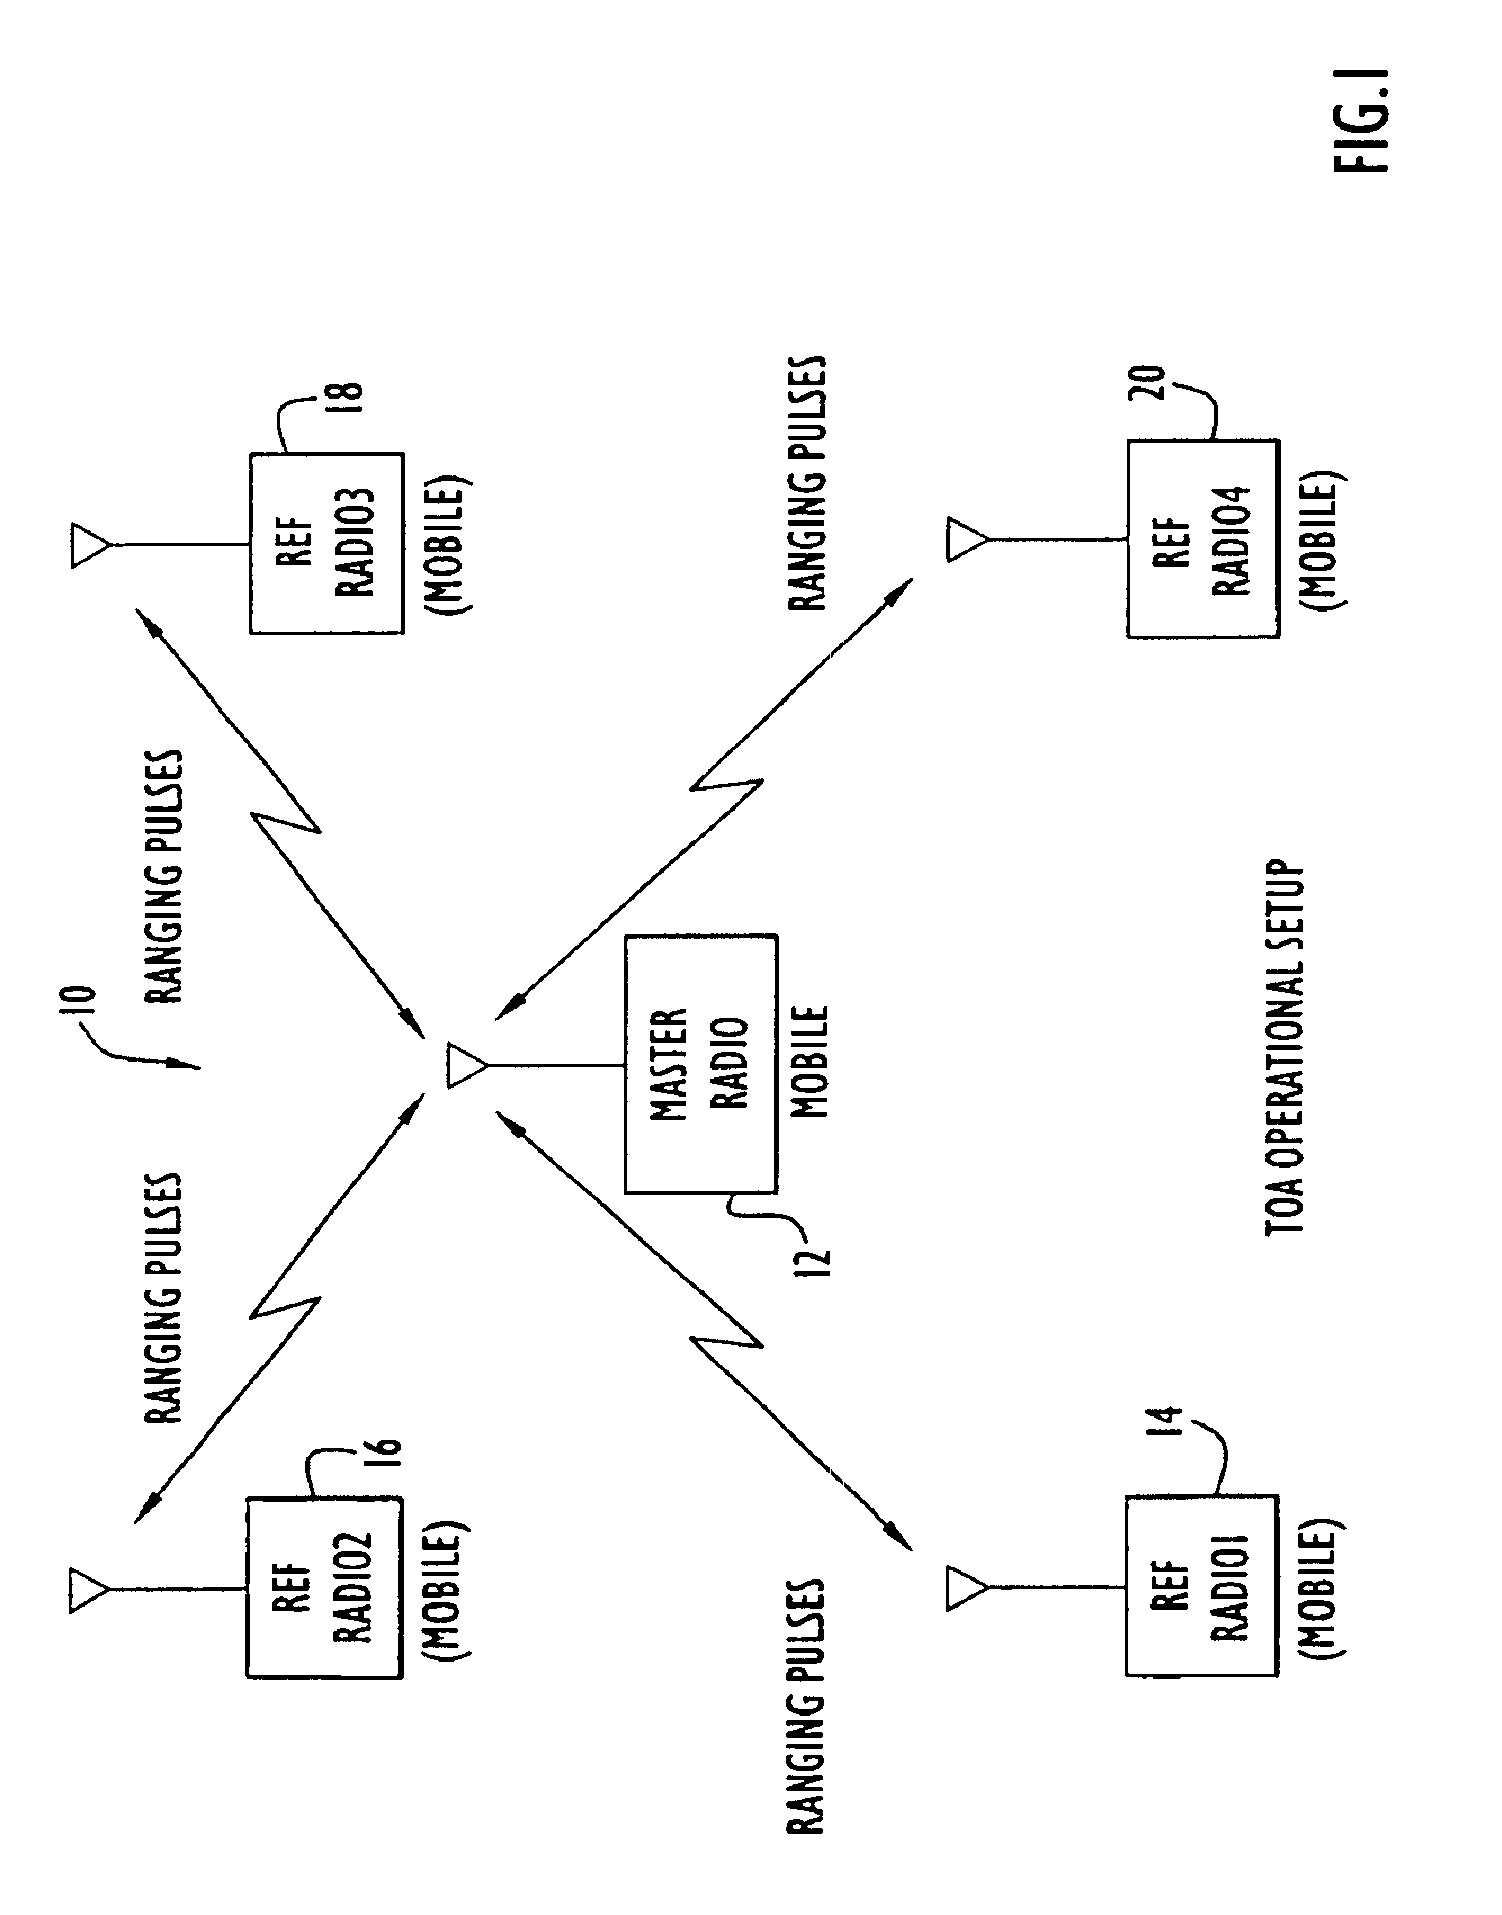 Method and apparatus for high-accuracy position location using search mode ranging techniques